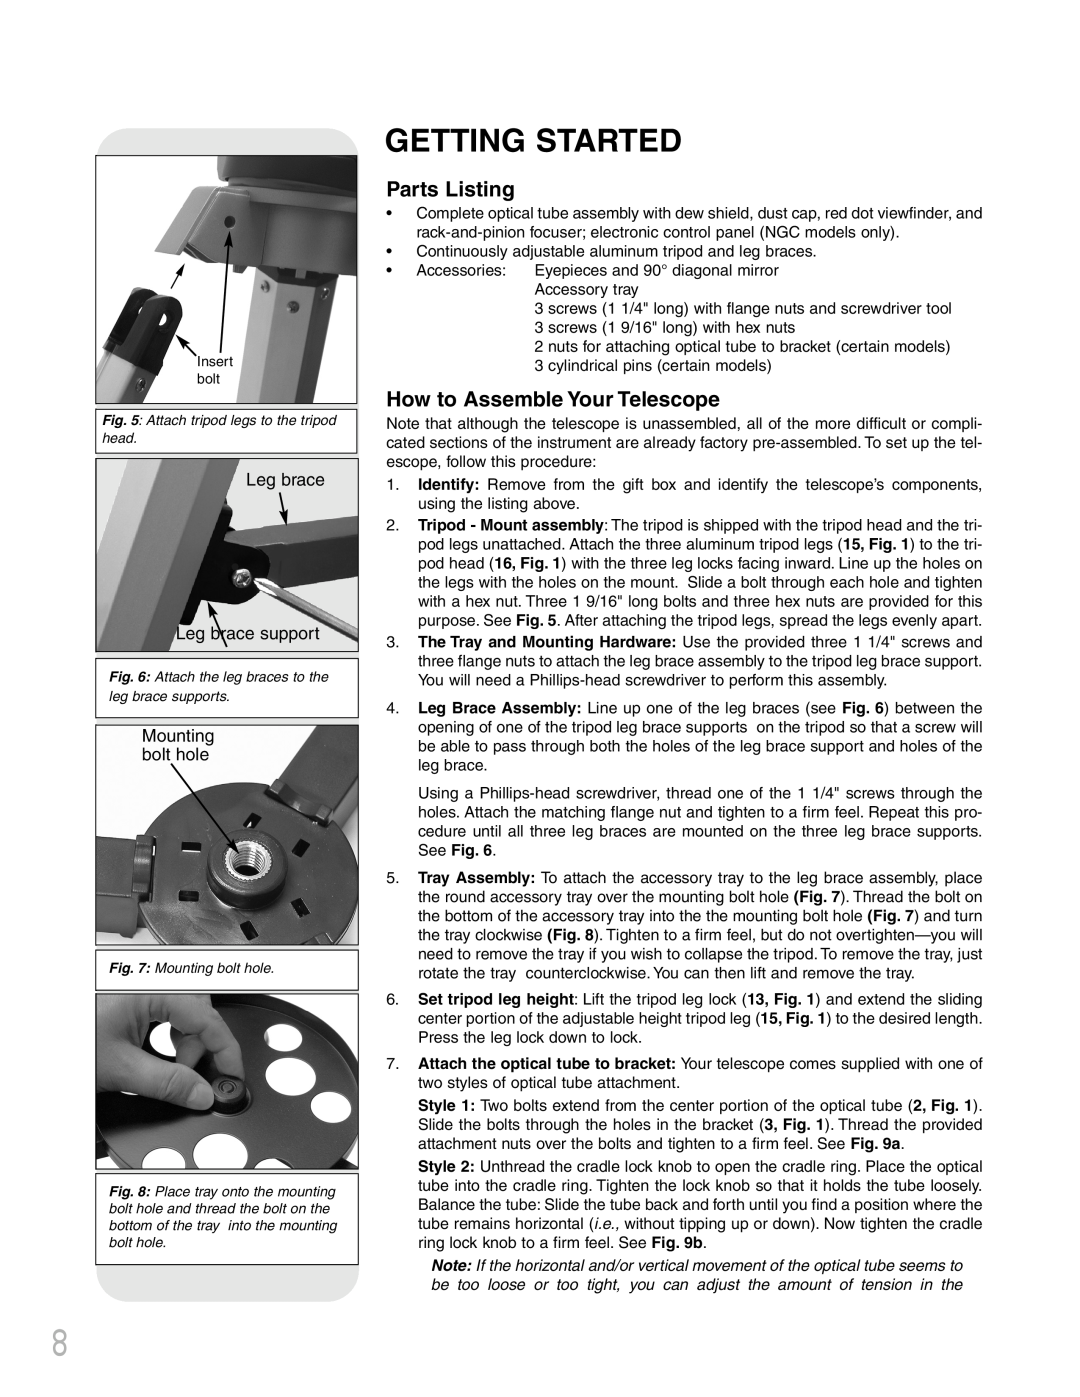 Meade NGC instruction manual Getting Started, Parts Listing, How to Assemble Your Telescope 